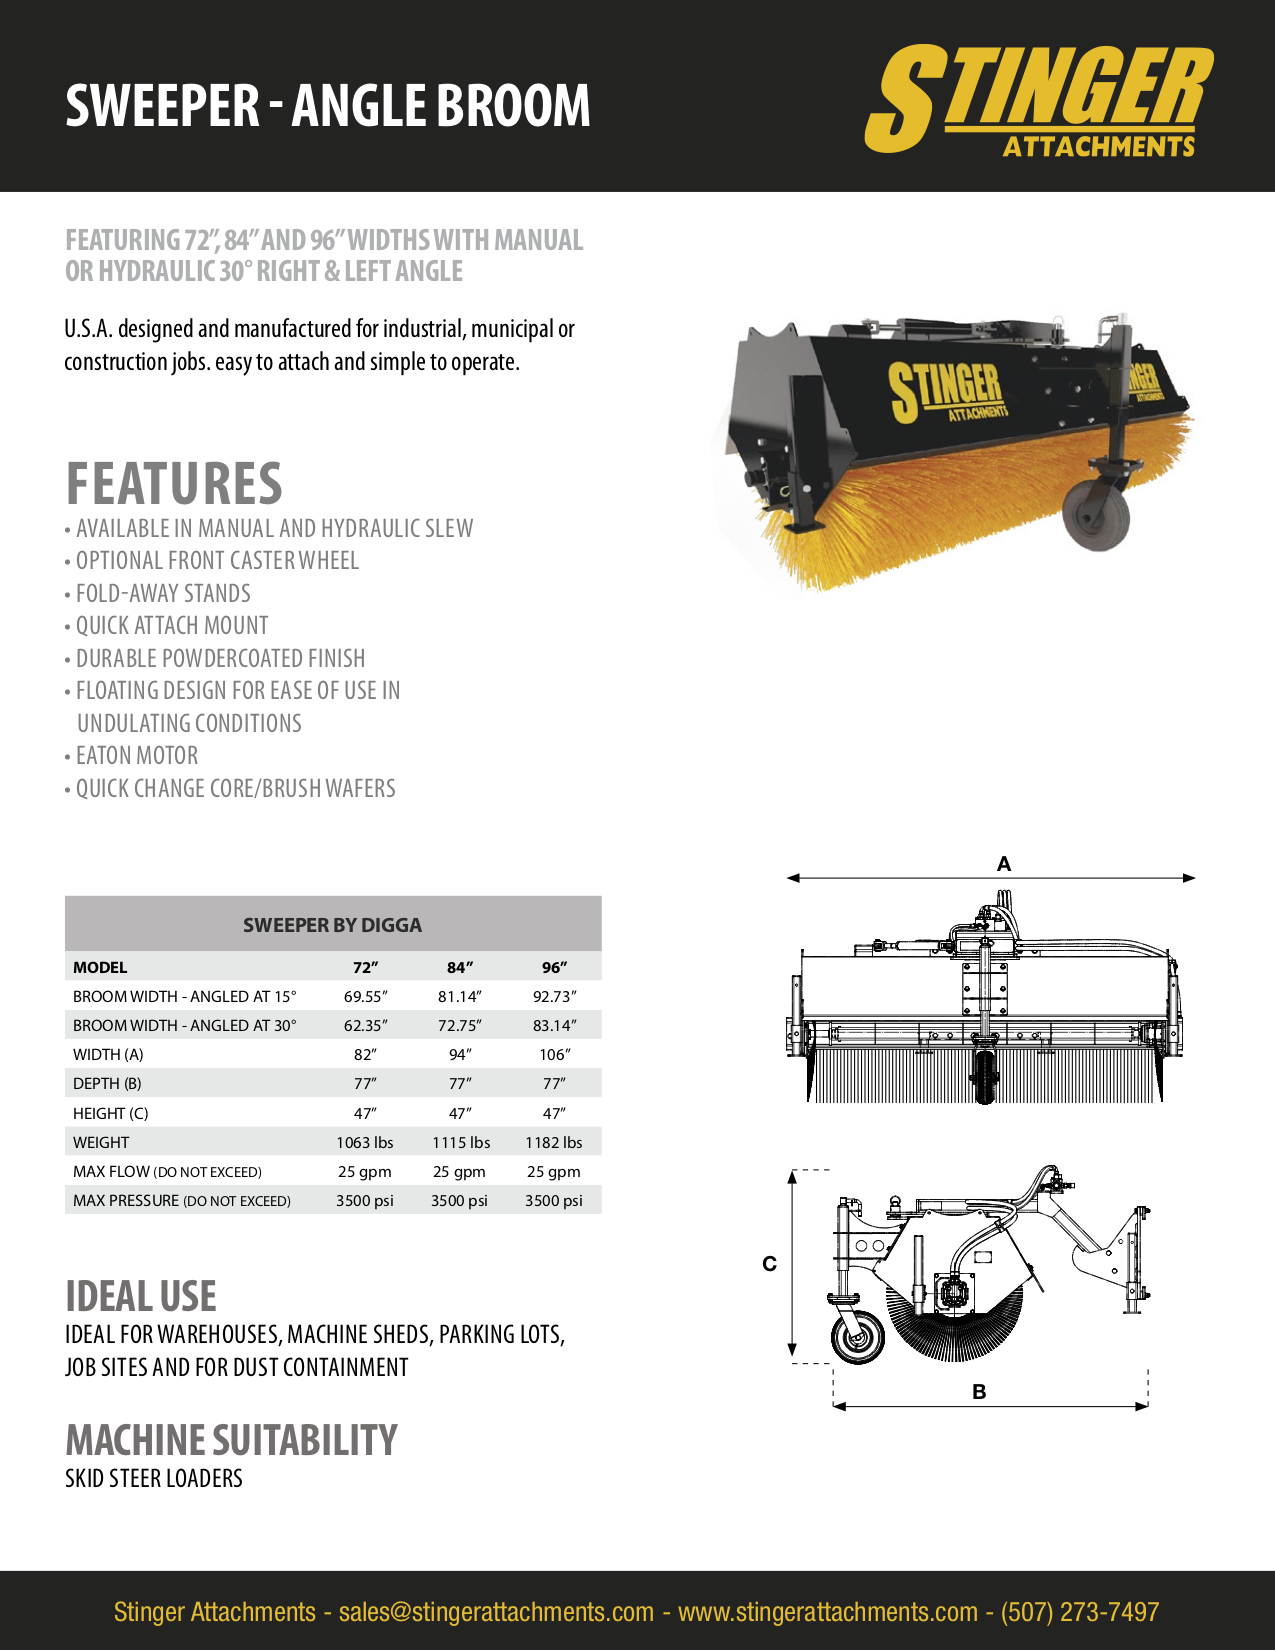 Angle Broom Sweeper Feature Sheet